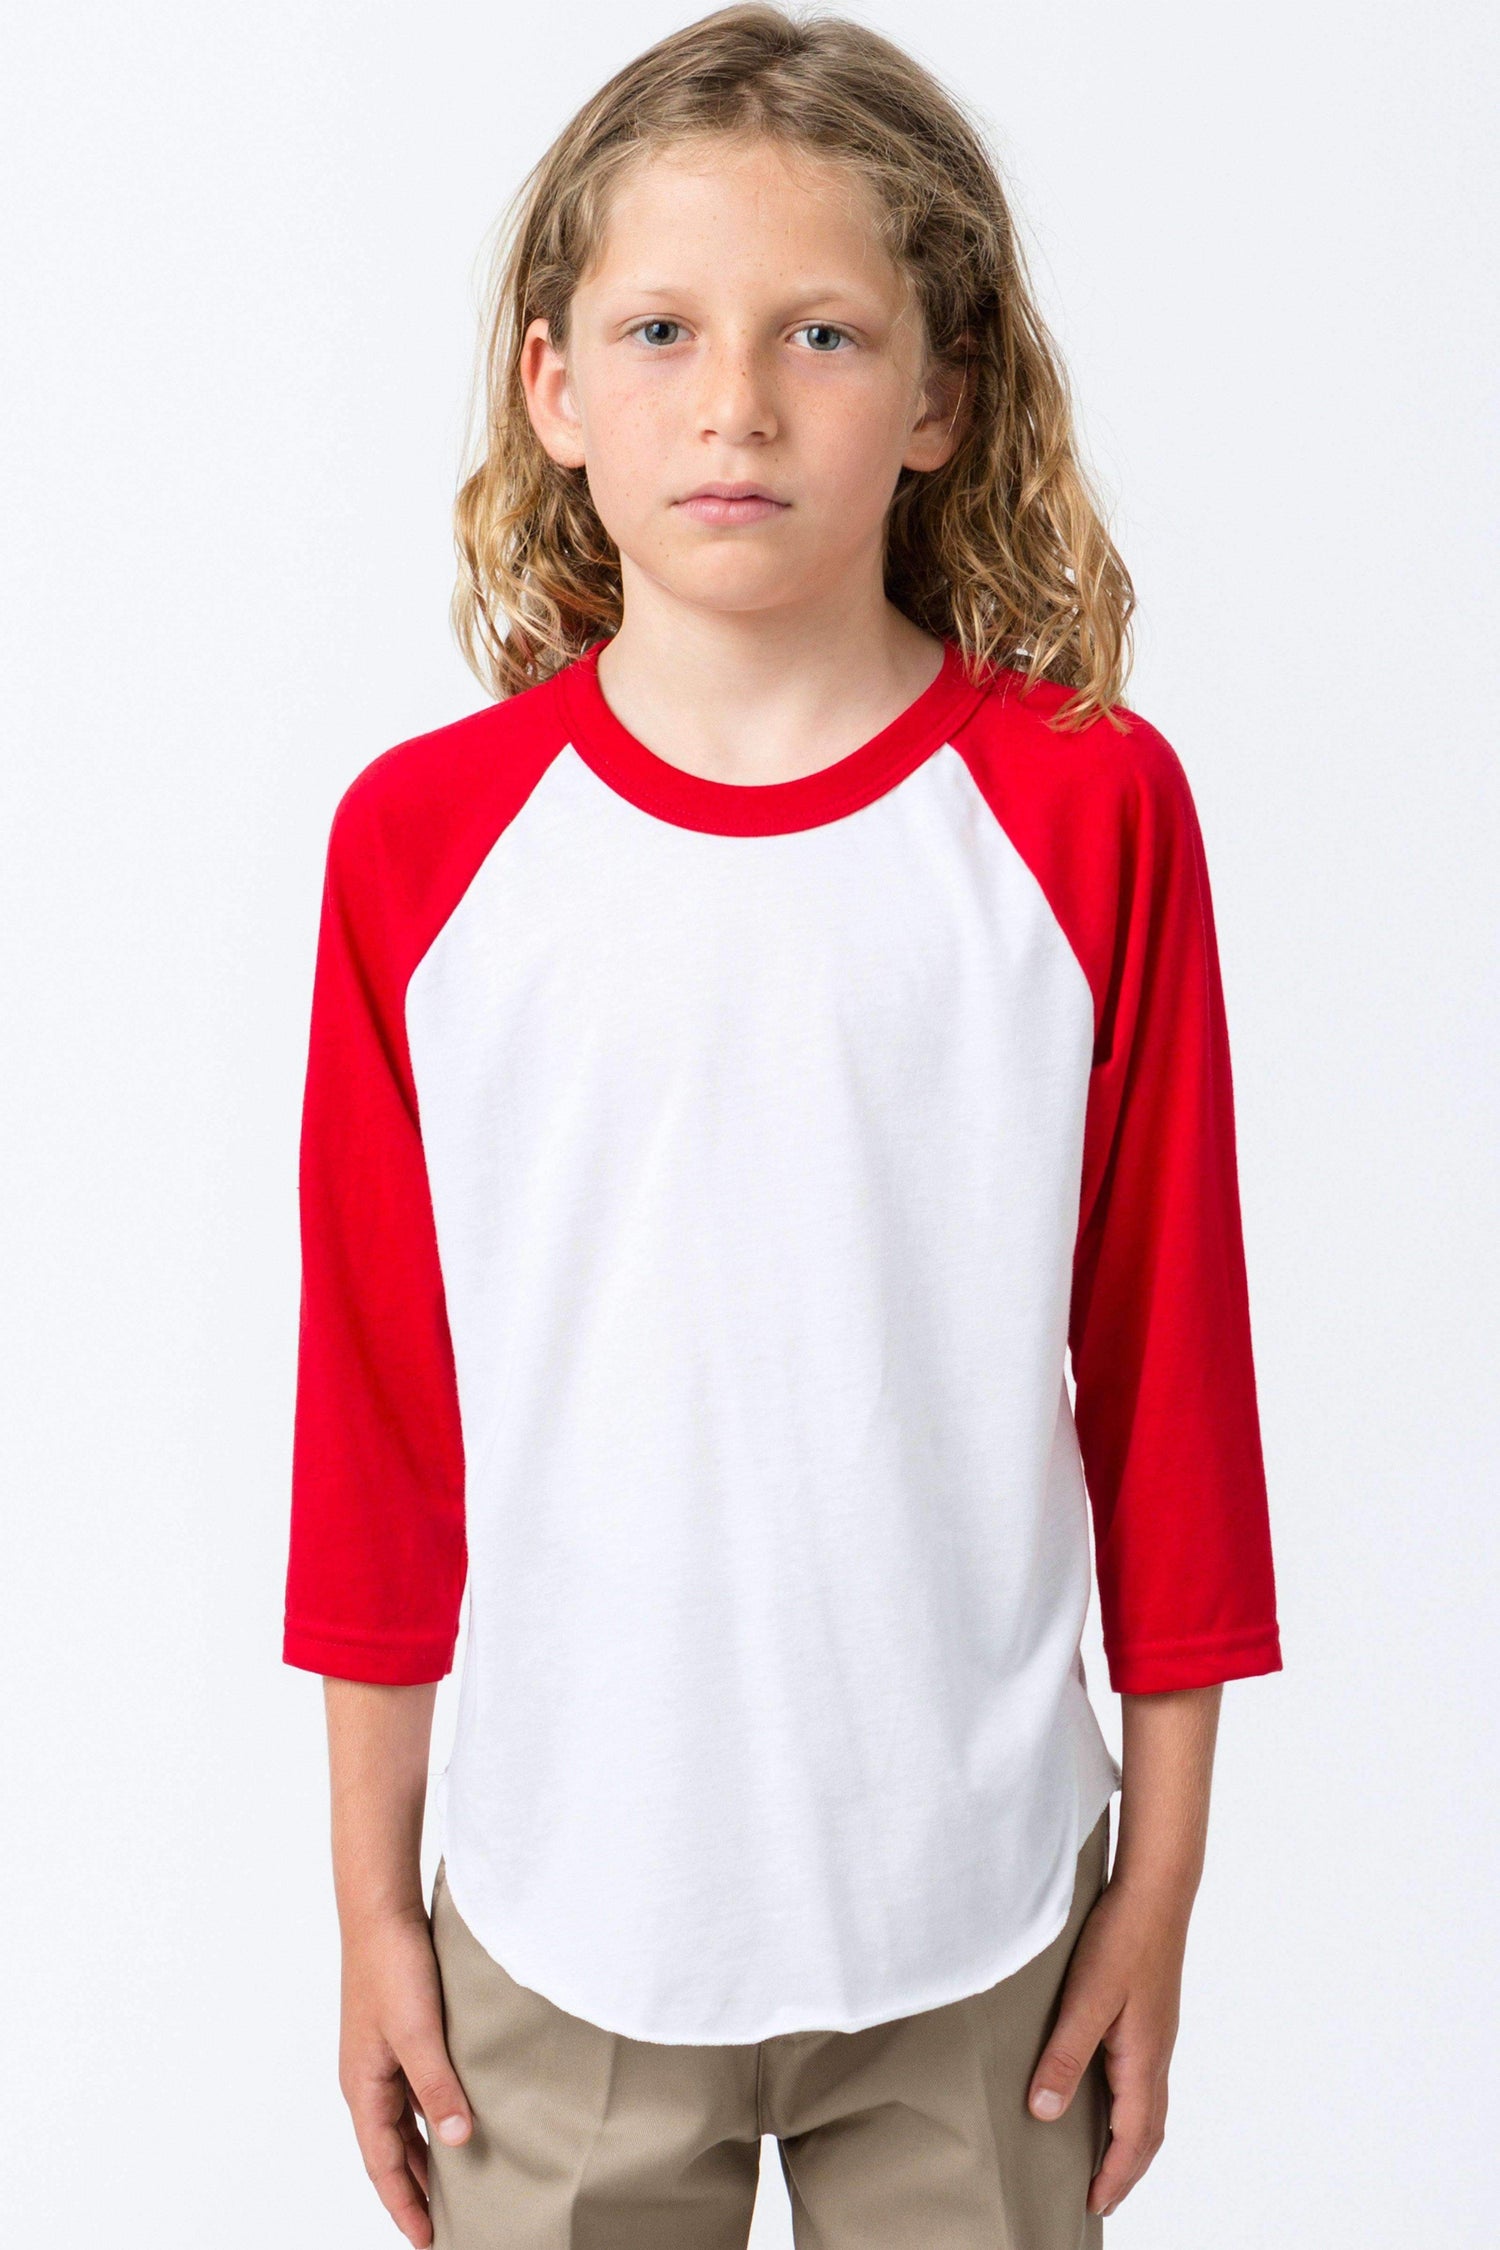 FF2053 - Youth 3/4 Sleeve Poly Cotton Raglan Kids Los Angeles Apparel White/Red 8 